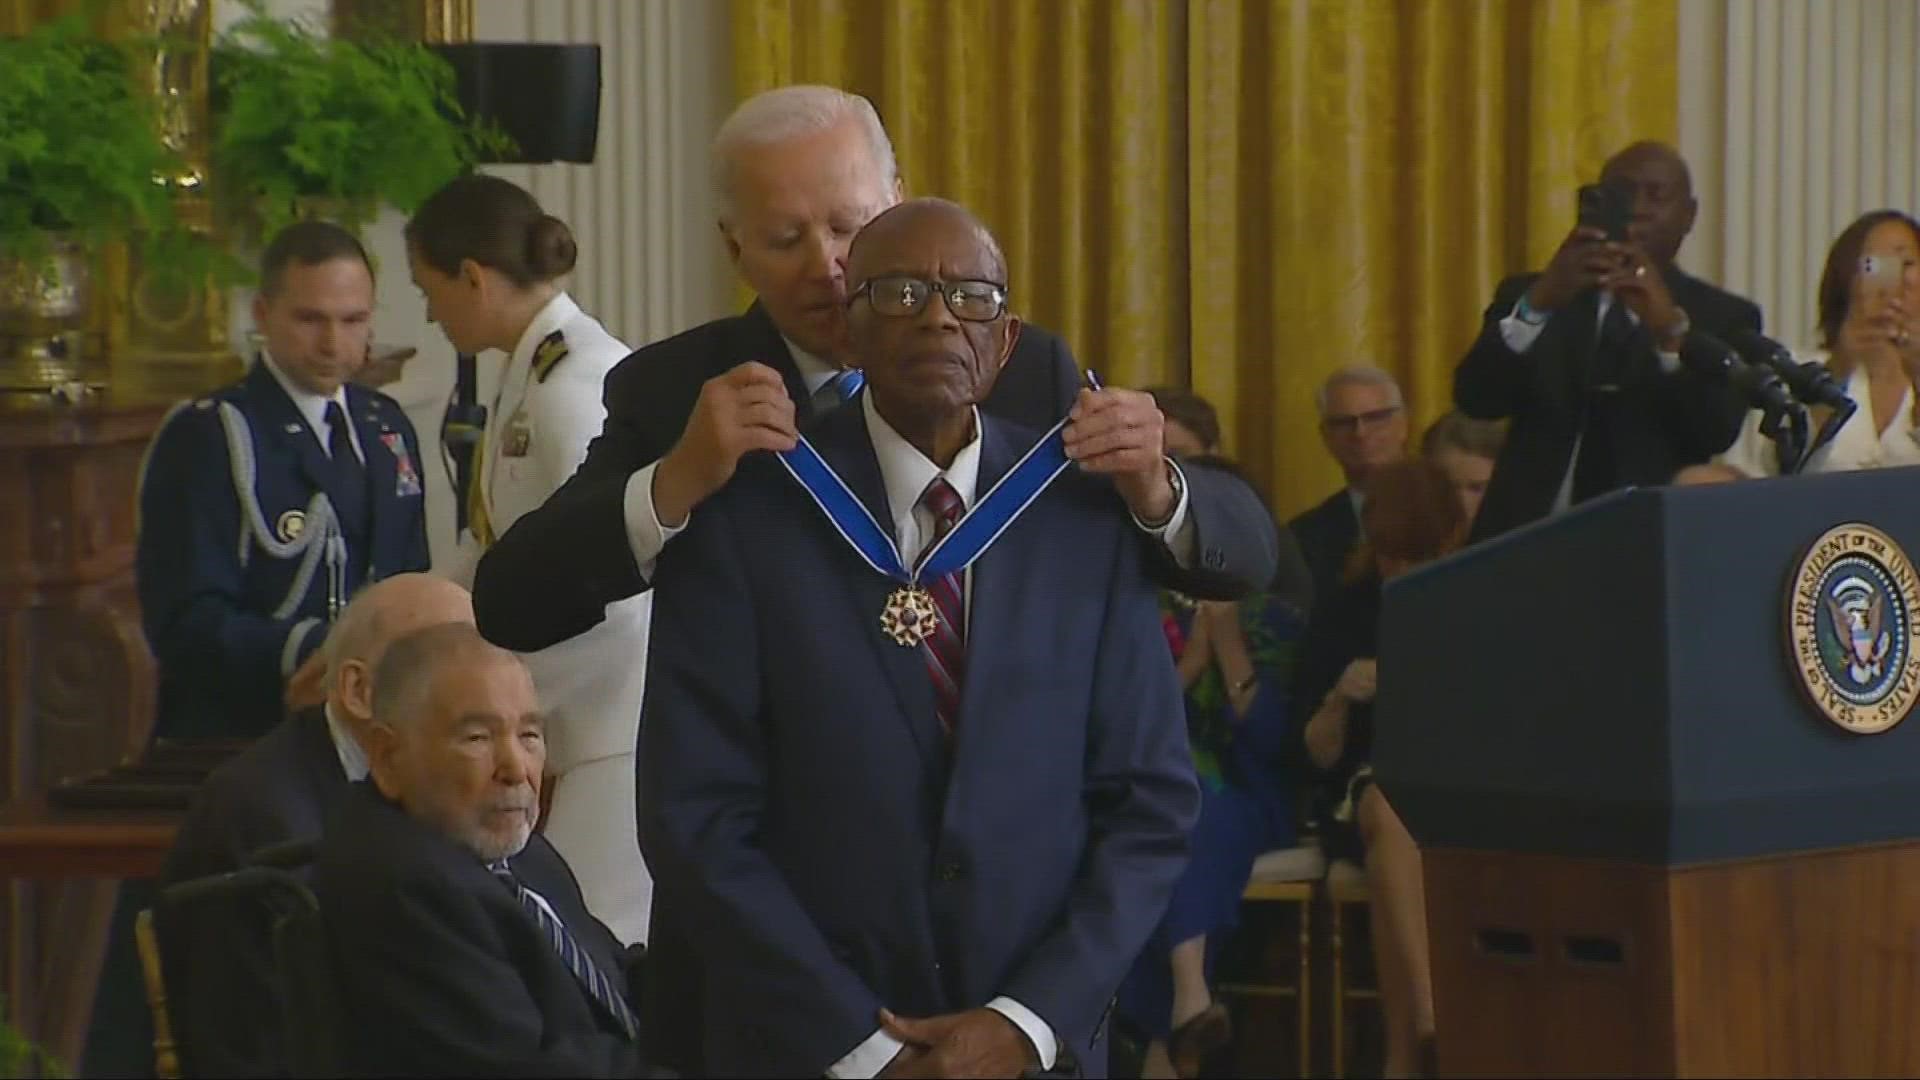 Fred Gray, whom Martin Luther King Jr. once called the "chief counsel for the protest movement," received the Presidential Medal of Freedom from President Joe Biden.